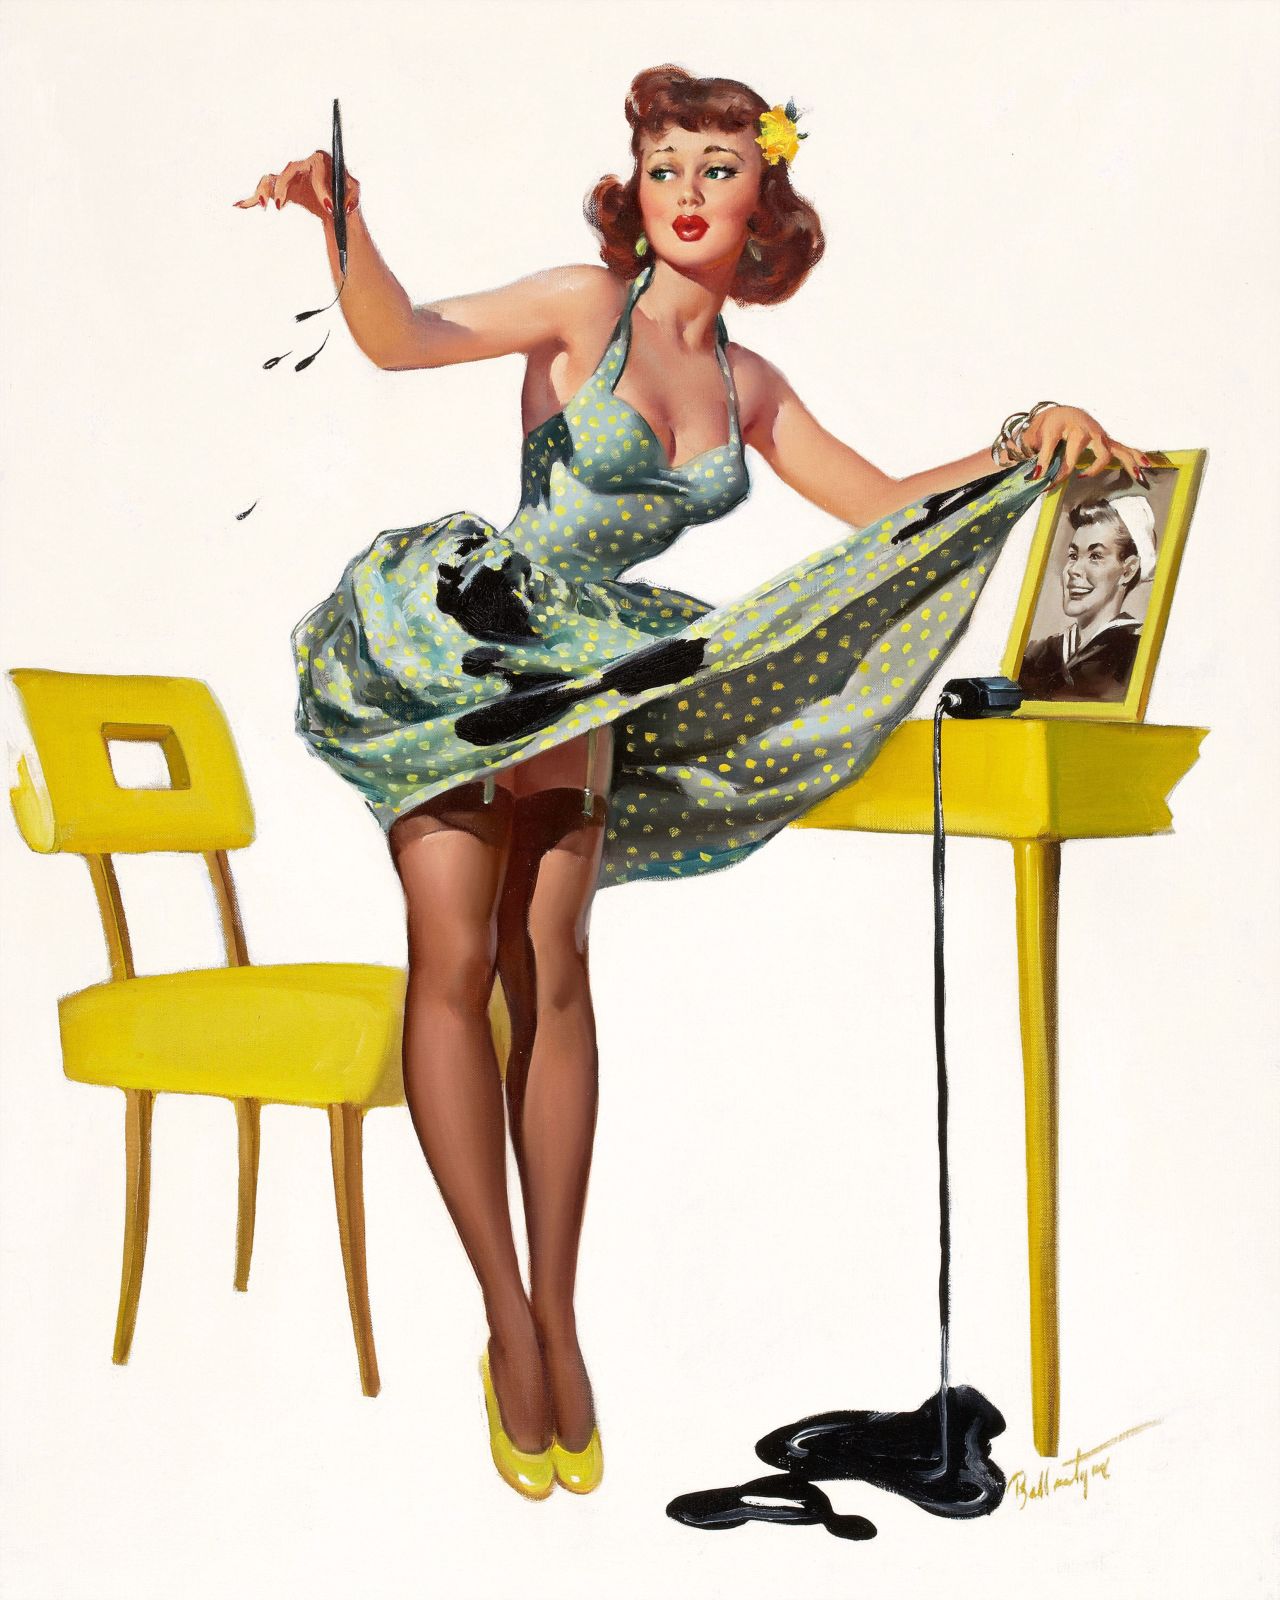 Notably, pin-up paintings were not intended for secret viewing by teenage boys. Instead, as the term 'pin-up' indicates, they were proudly displayed on walls.